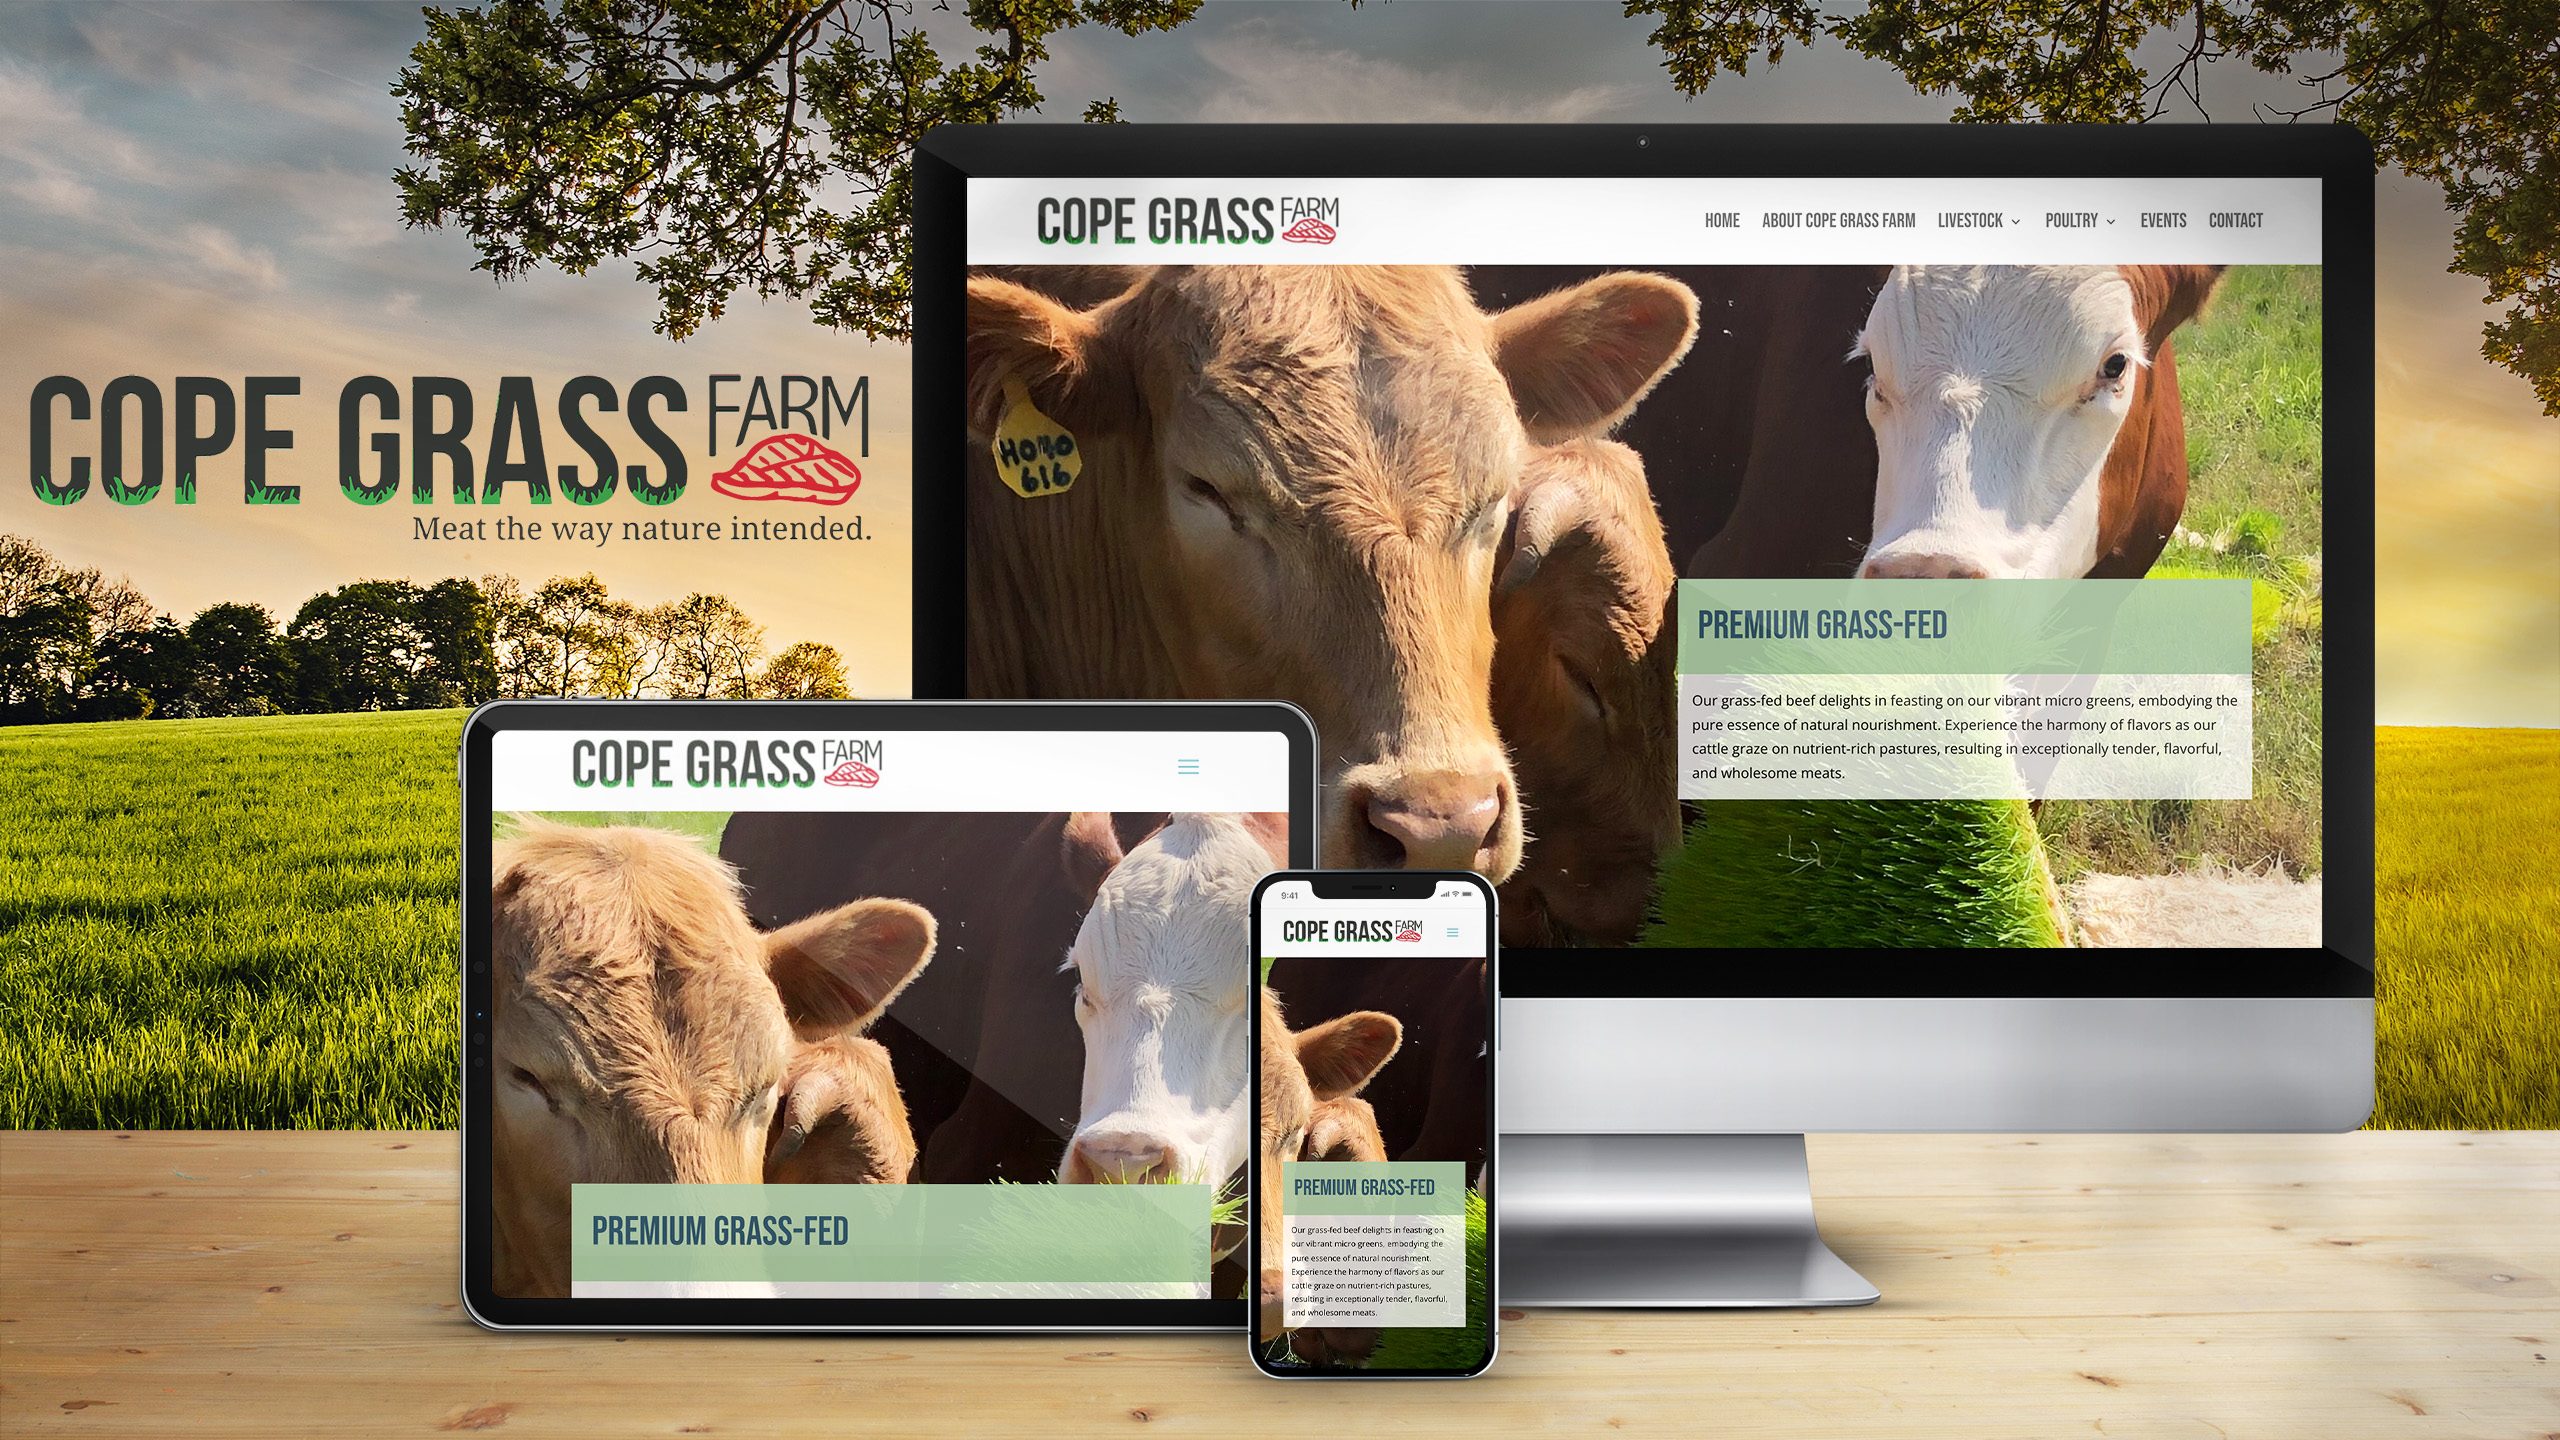 A portfolio image mocking up the Cope Grass Farm website on a desktop, tablet, and mobile phone is shown. The farm's logo is shown top left. The background is a landscape with a sunrise or sunset and a few trees blurred behind the digital devices. 